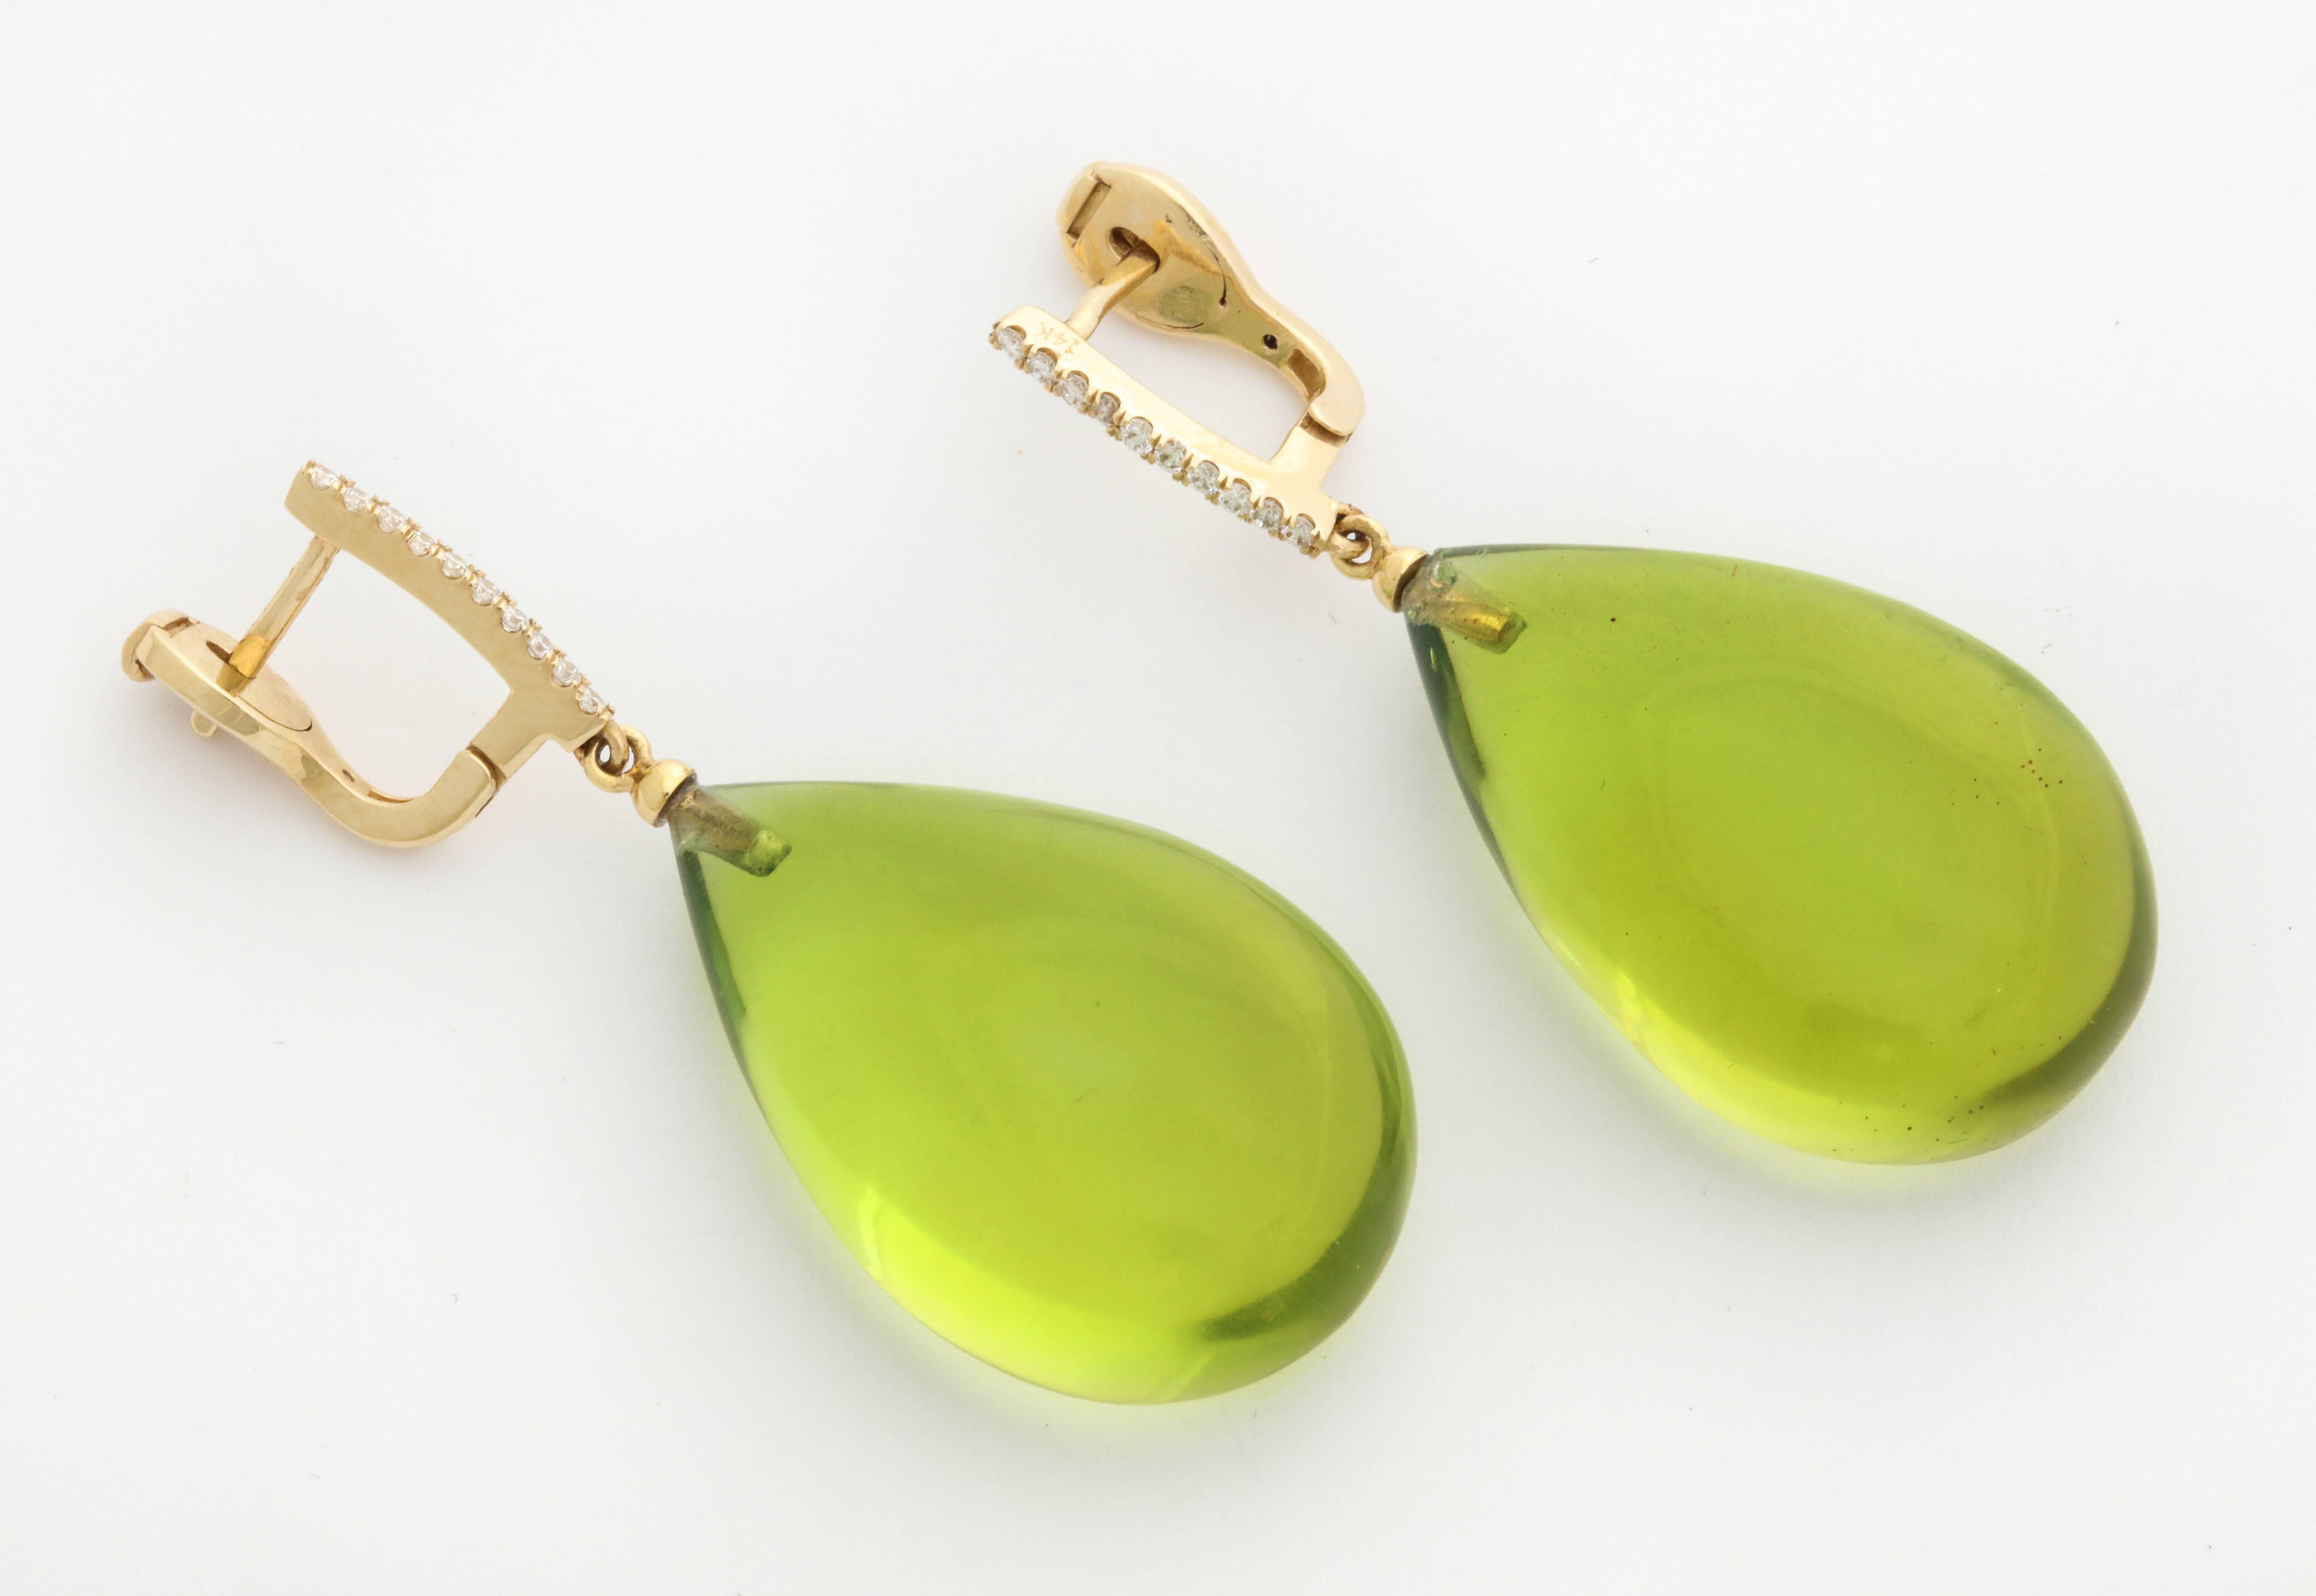 This very shade of green has just been voted Pantone's color of the year for 2017, so here is your chance to get a jump on the competition. While the drops measure an impressive 29x19mm, the earrings are light as a feather due to the clever use of